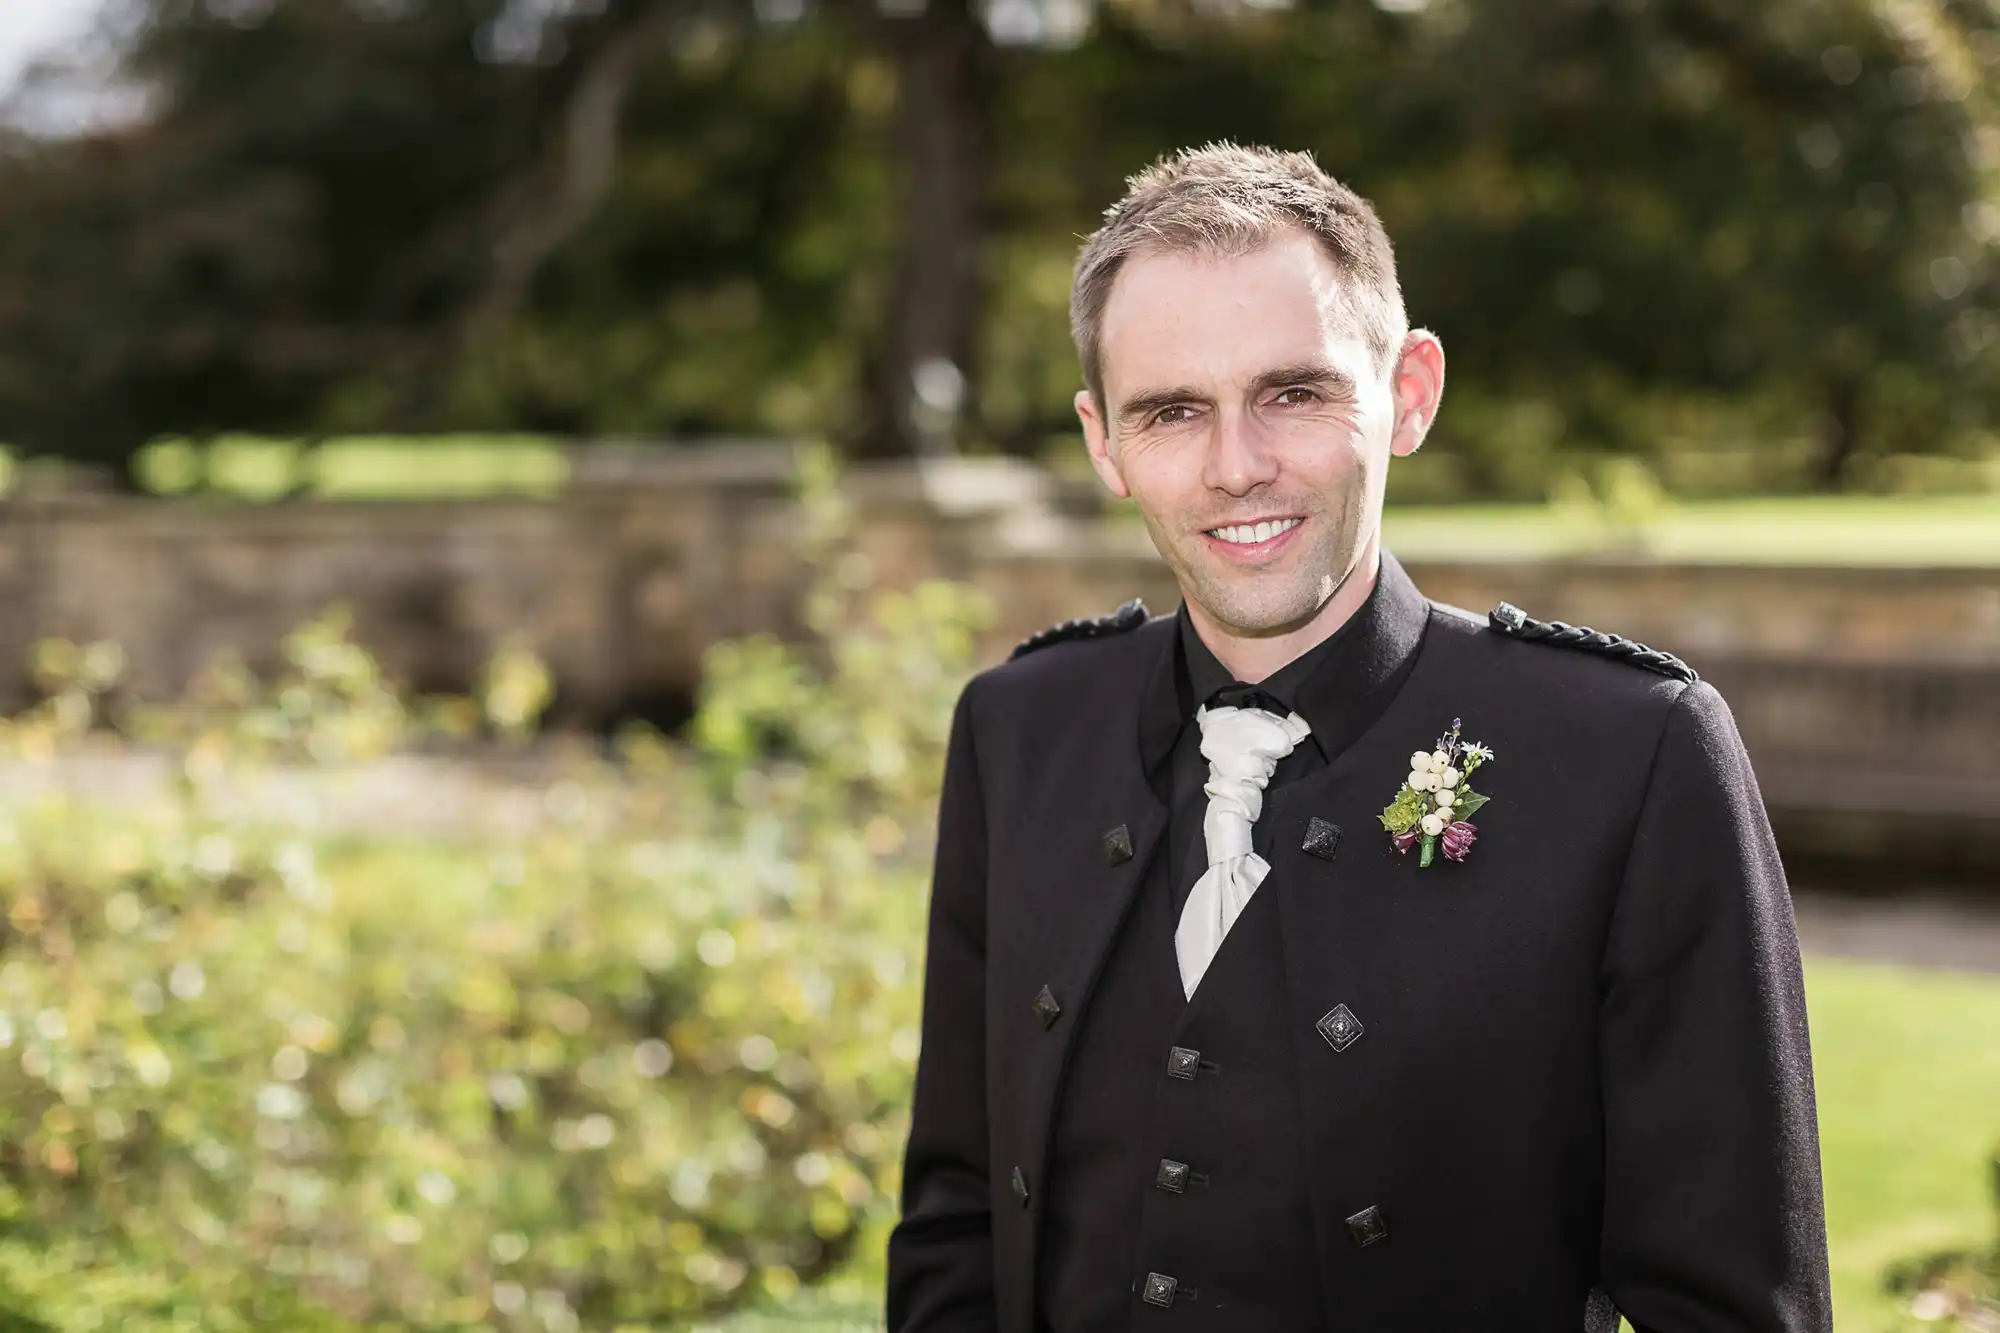 A man in a formal kilt jacket and tie smiles at the camera, outdoors with greenery and sunlight in the background.